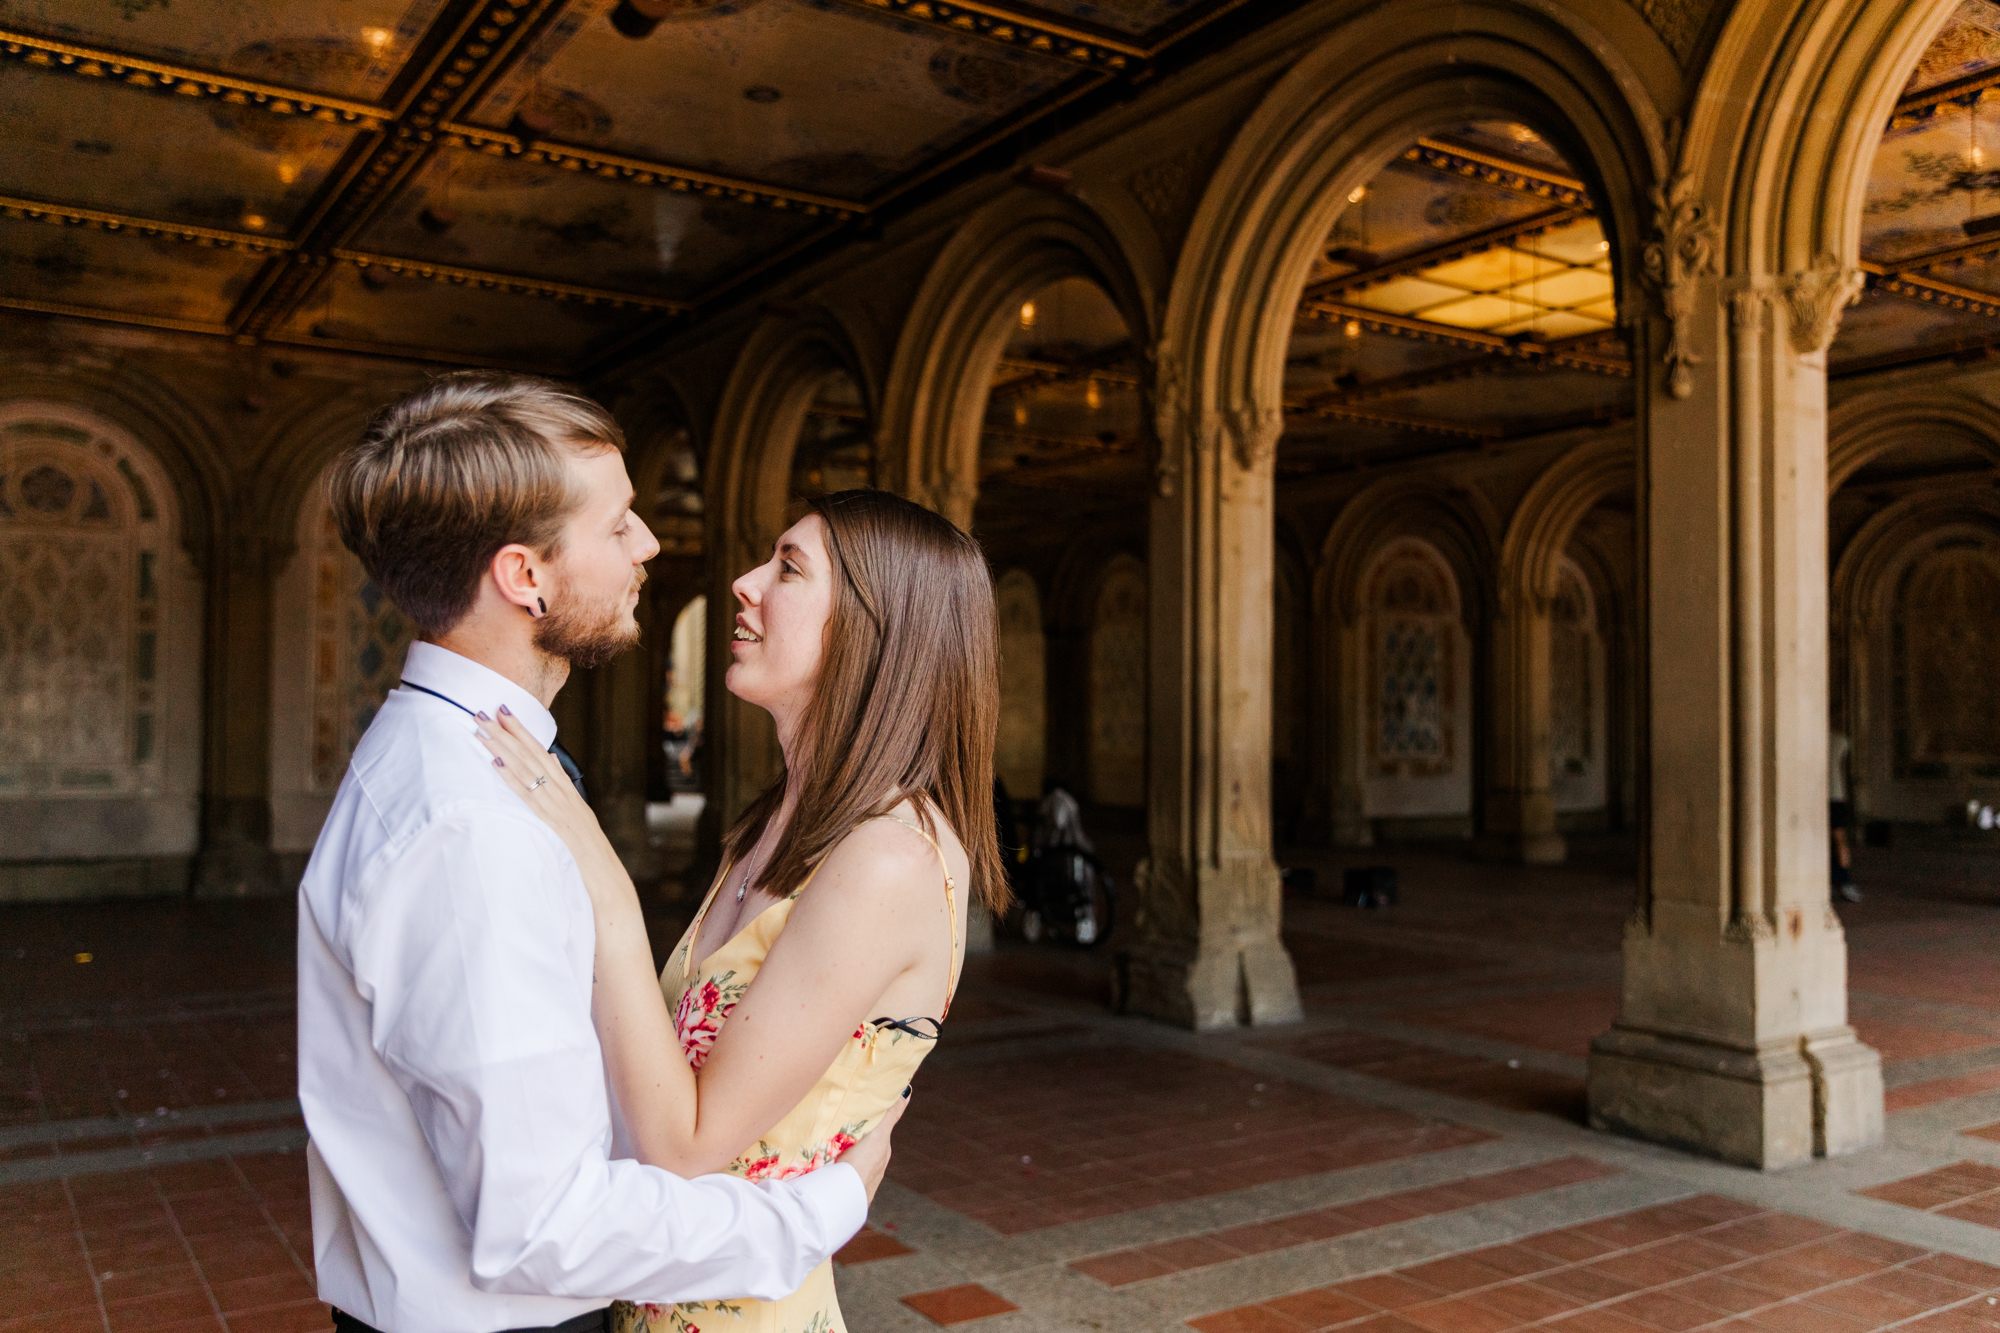 Perfect Central Park Elopement in the Summertime